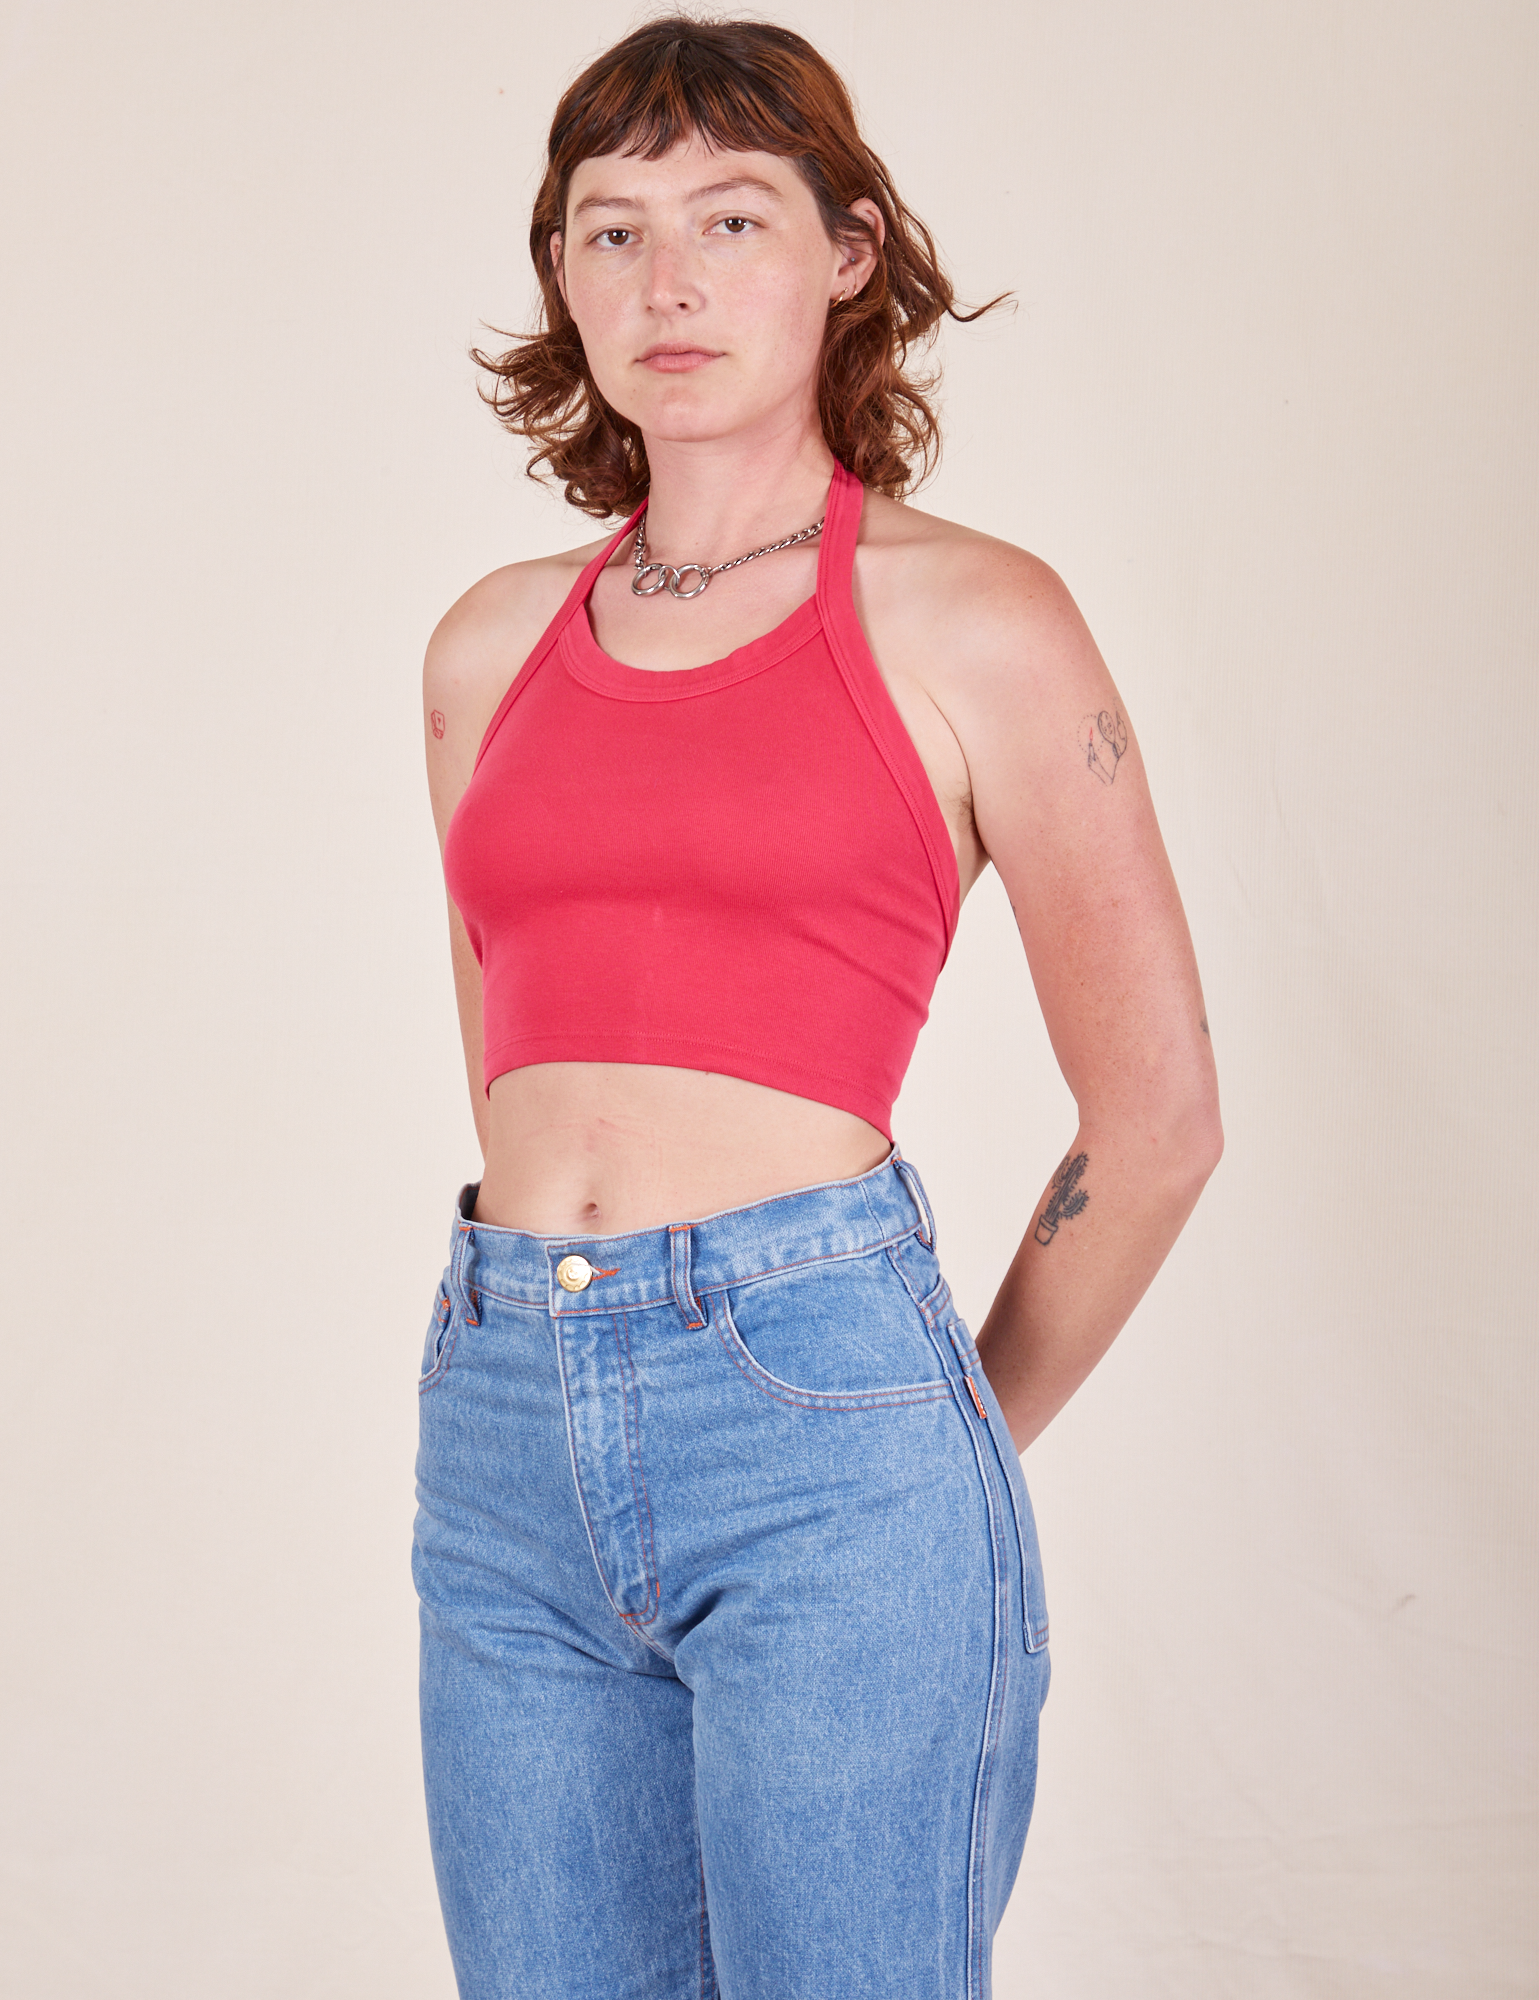 Alex is 5&#39;8&quot; and wearing P Halter Top in Hot Pink paired with light wash Frontier Jeans